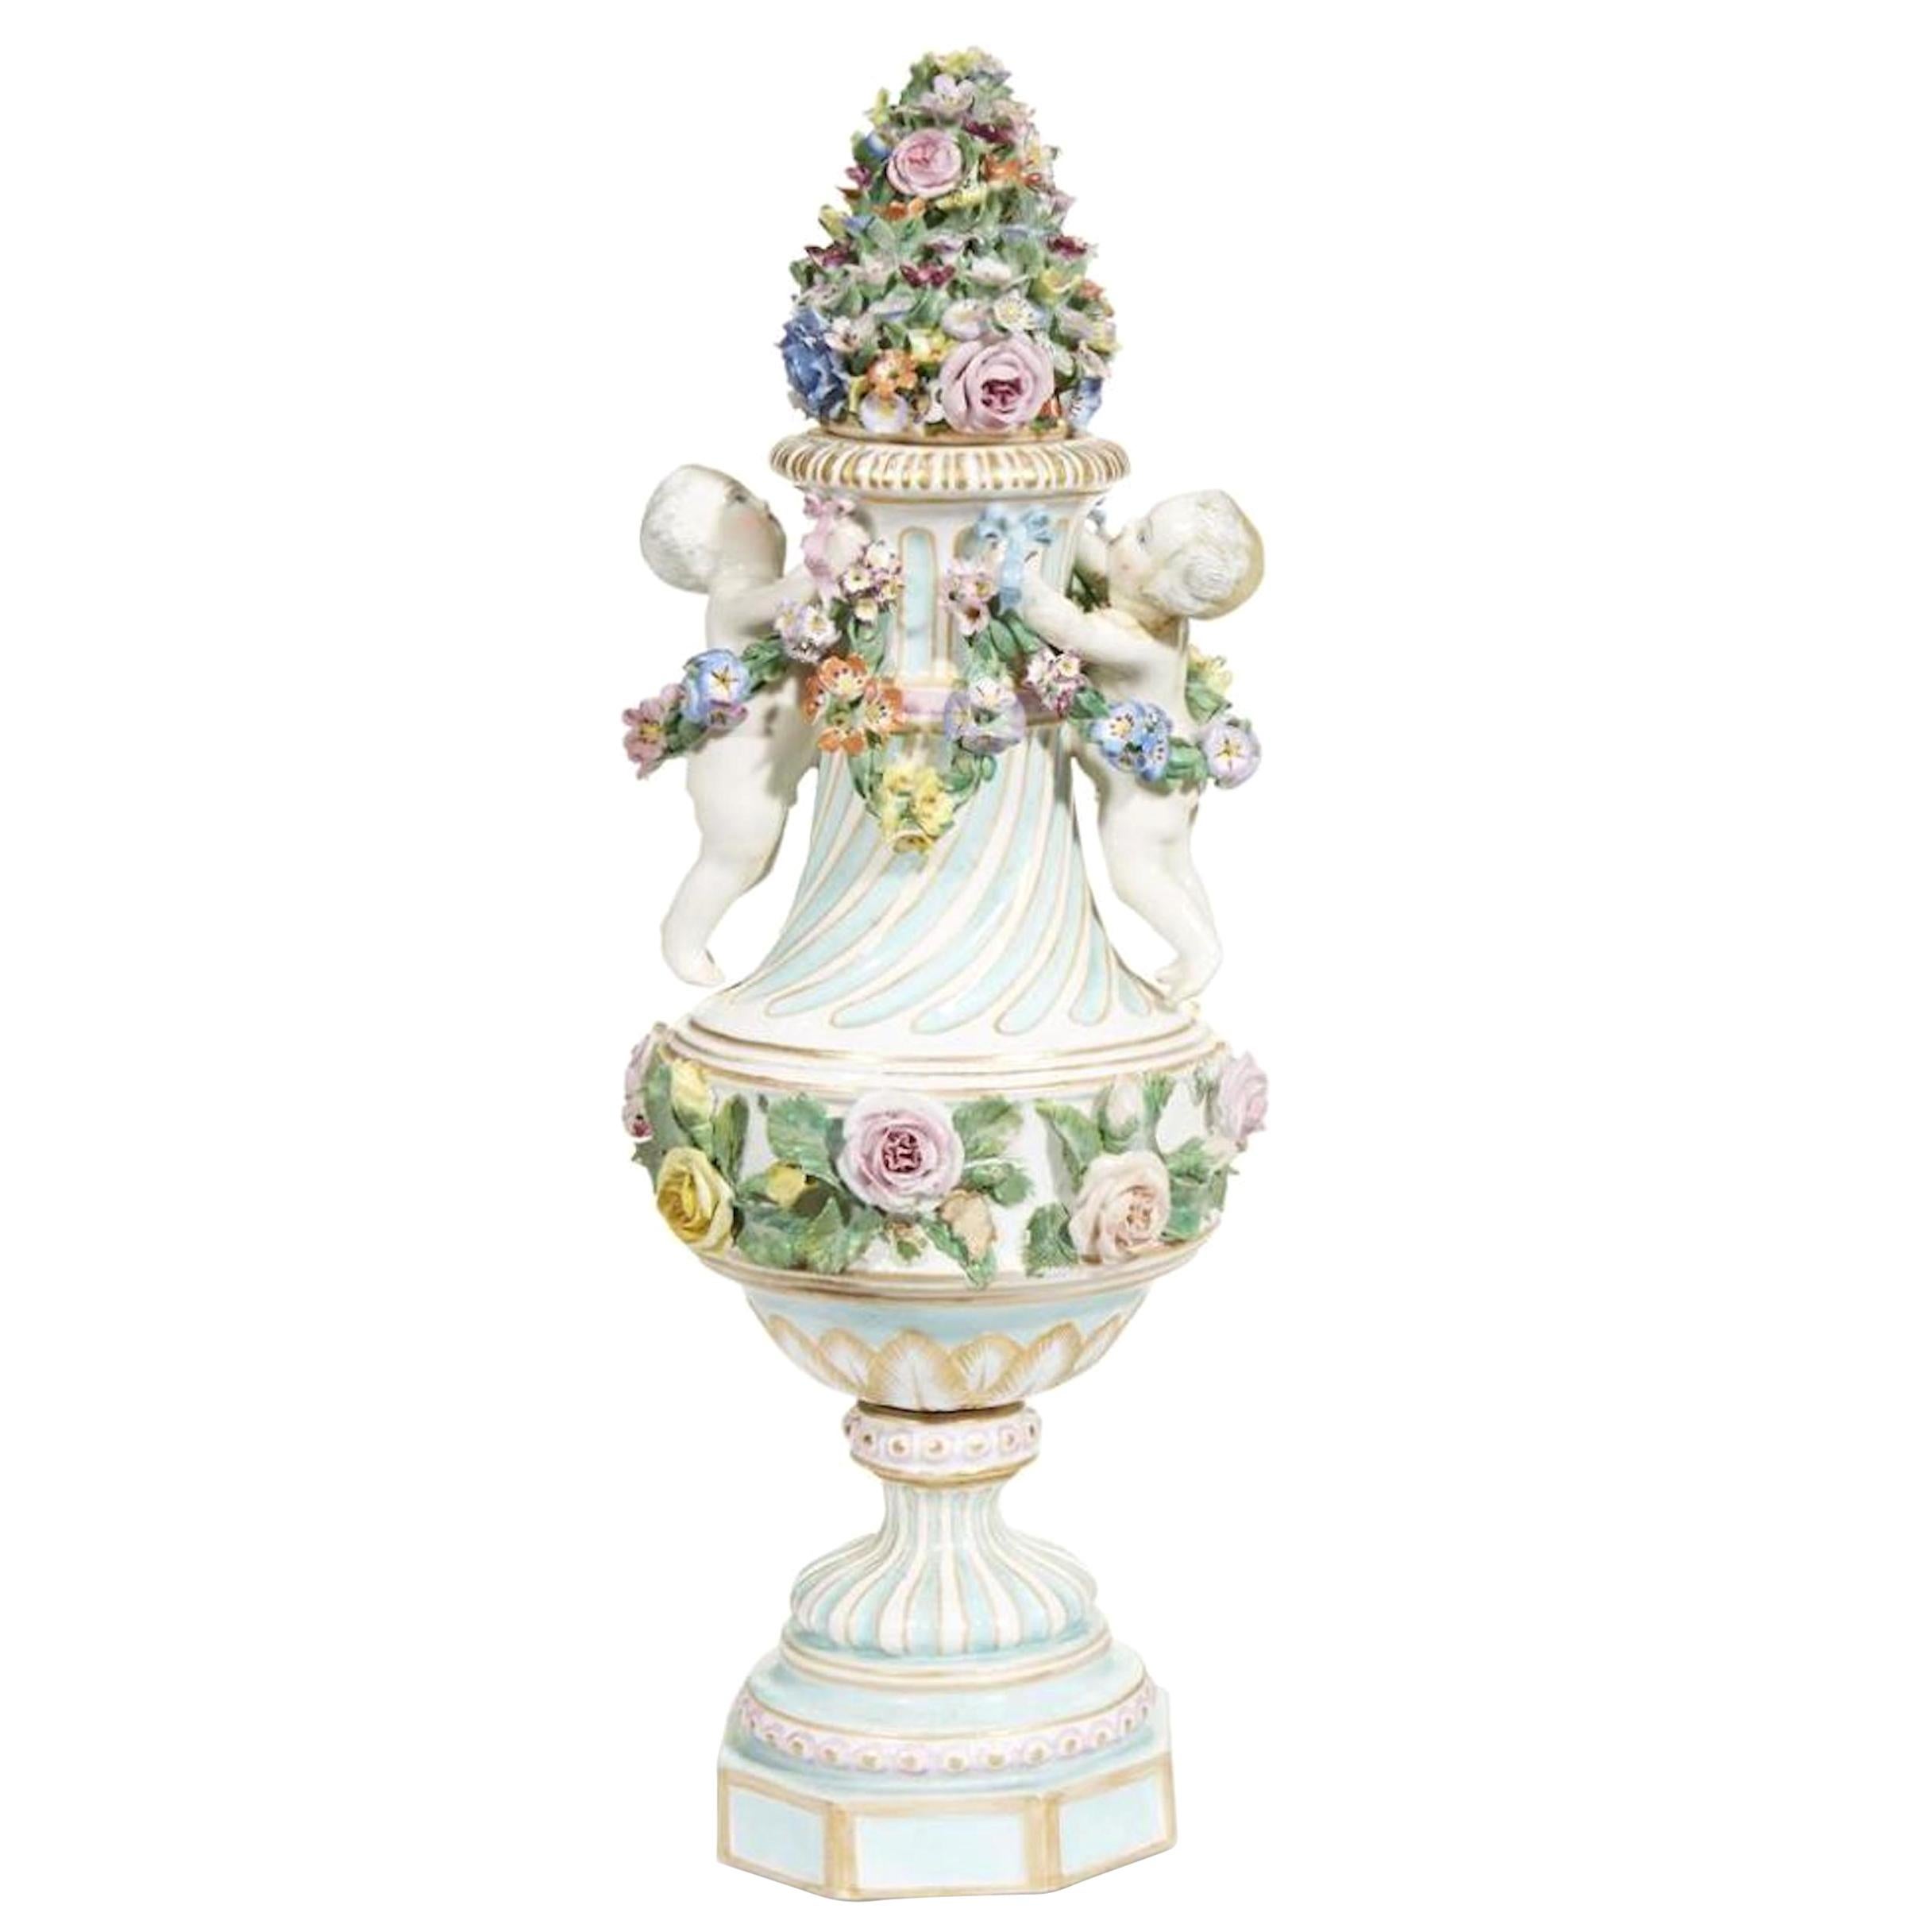 Meissen Style Covered Figural Vase, 1774-1815